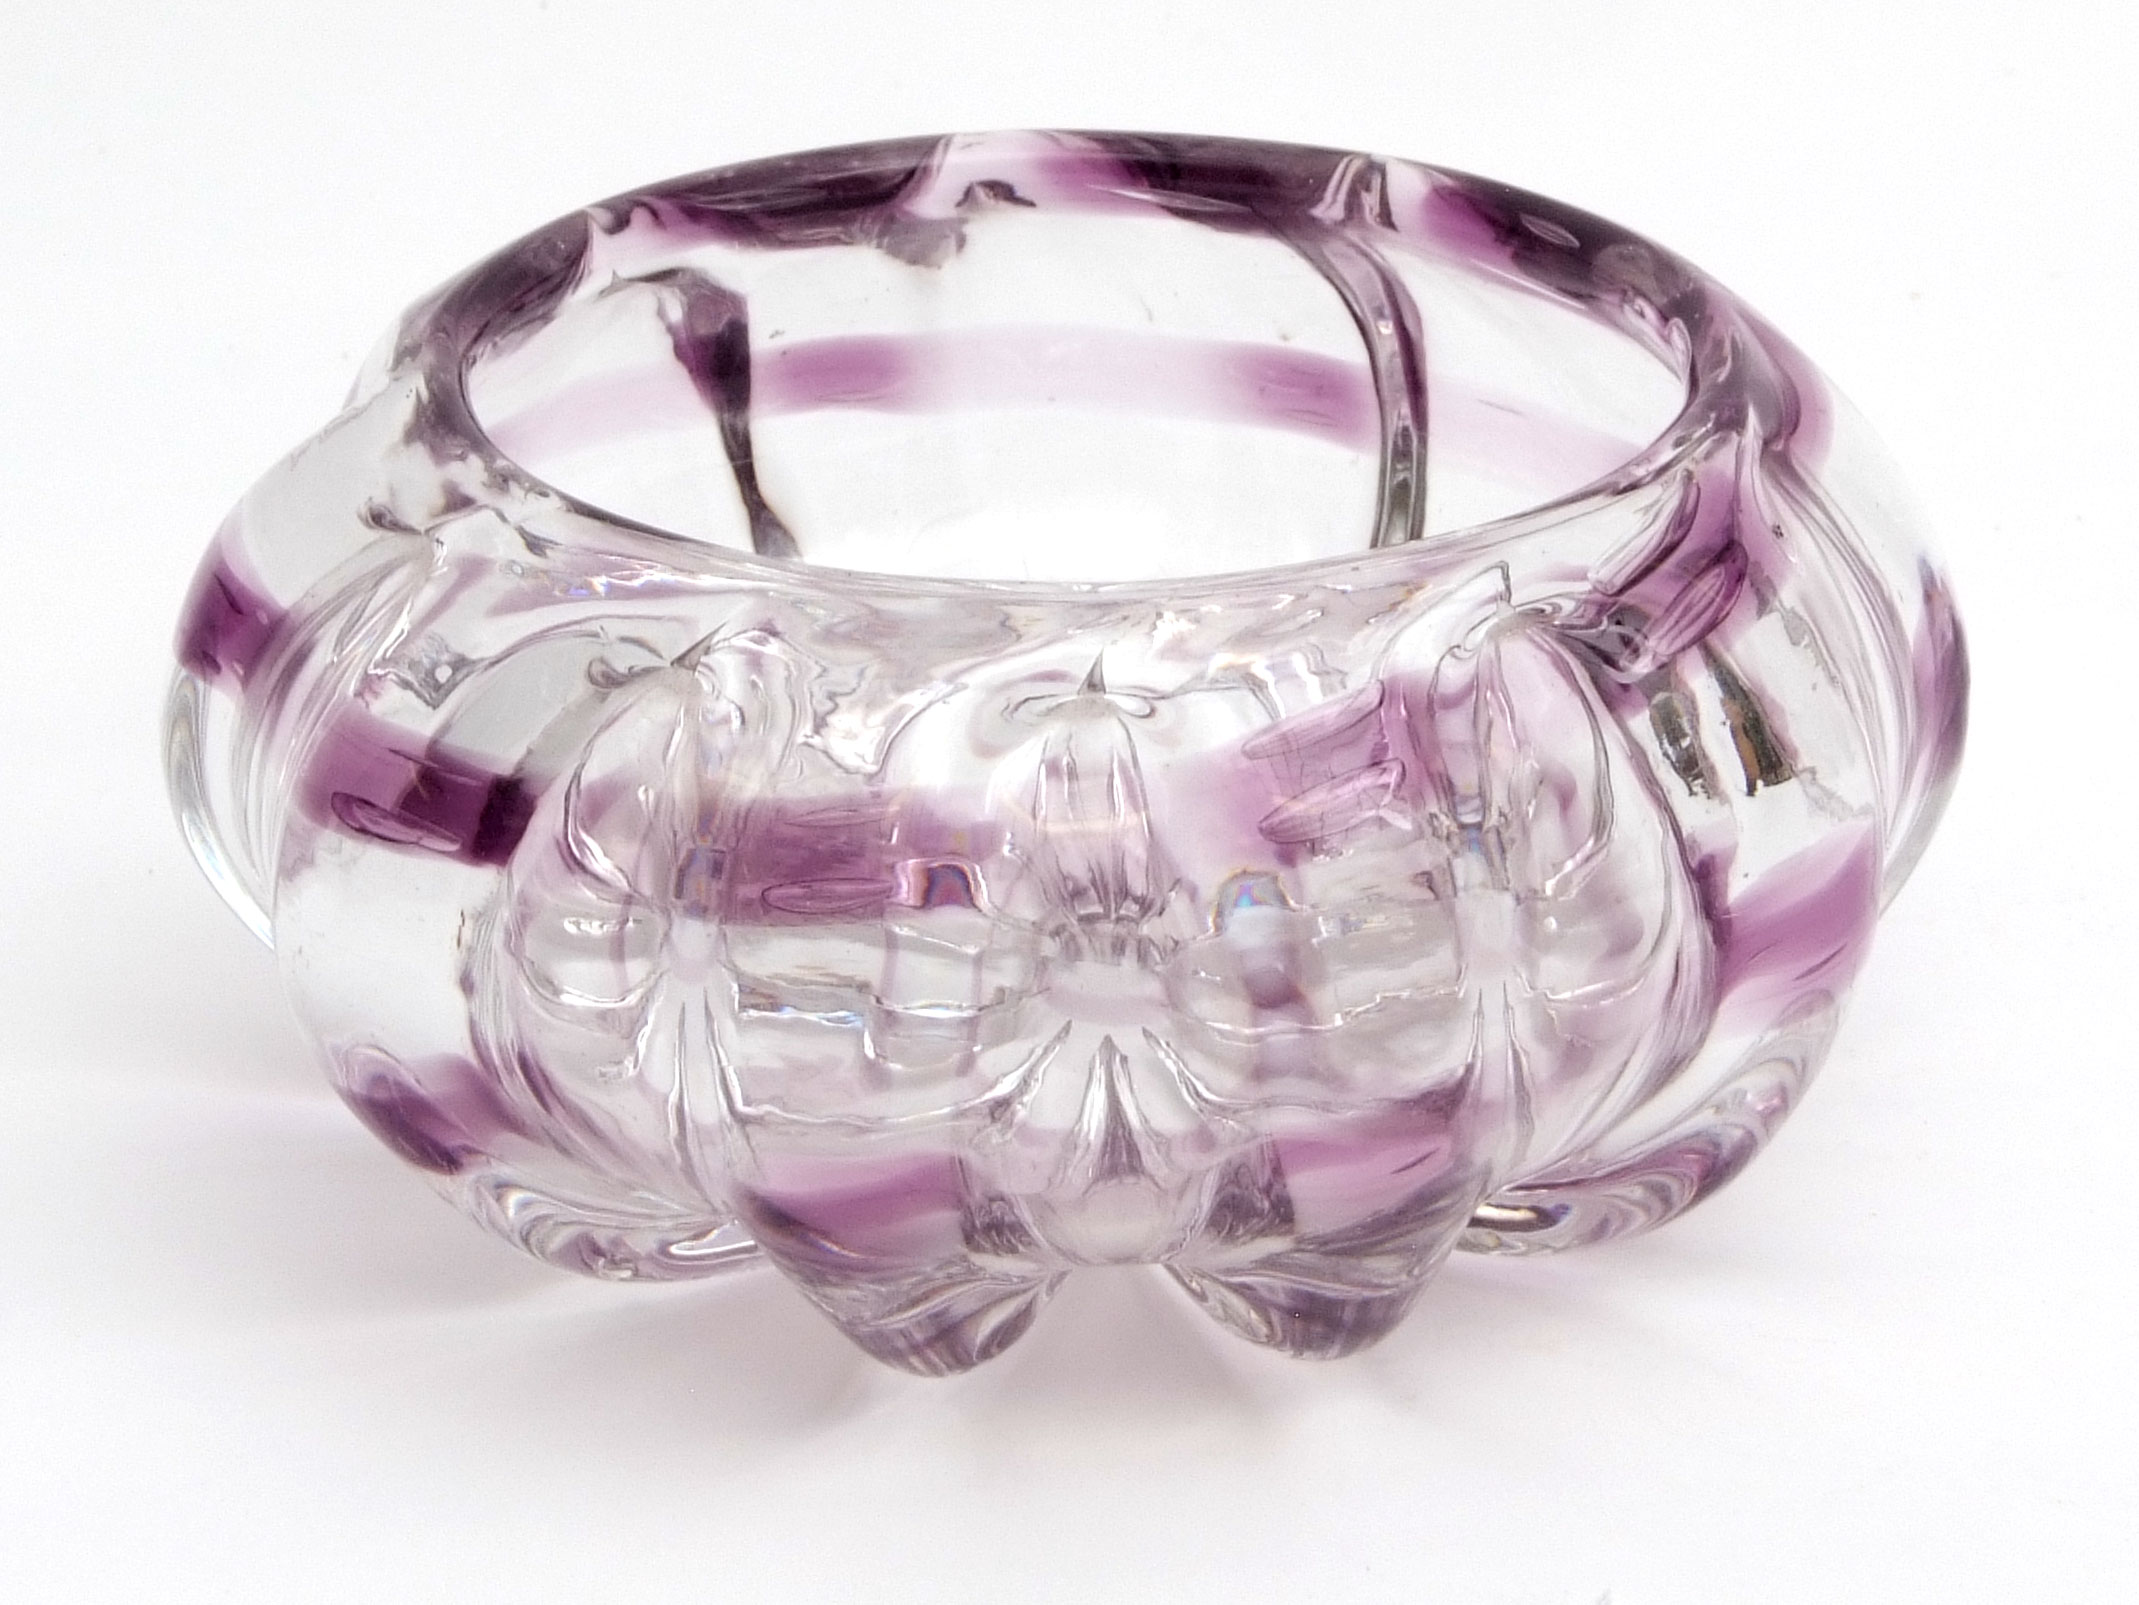 Mid-20th century Seguso "Sommerso" glass bowl designed by Flavio Poli, in clear glass with